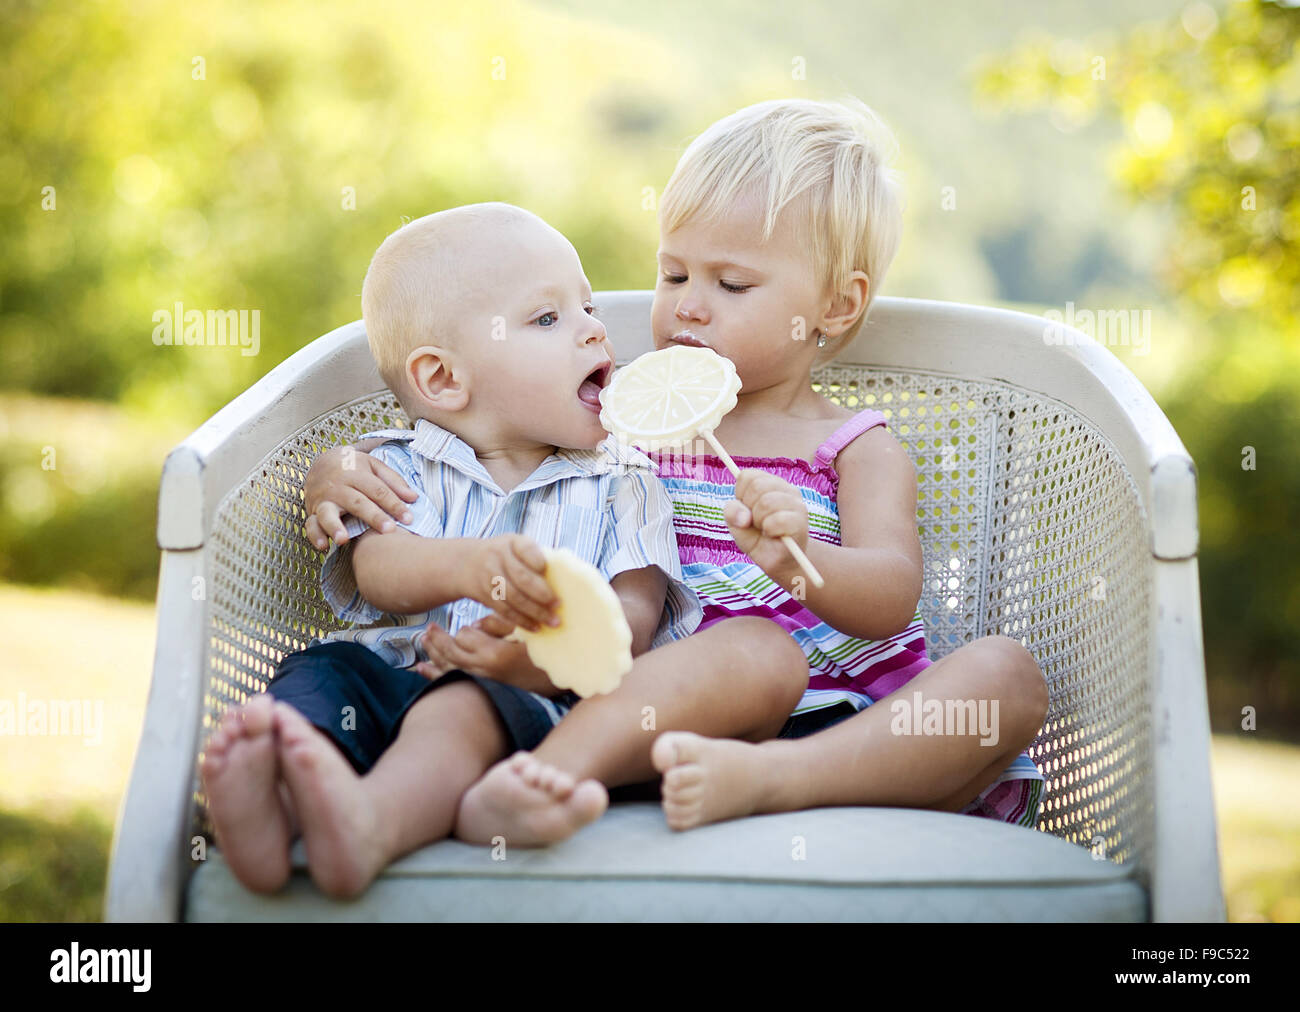 Two happy kids eating lolly in the park Stock Photo